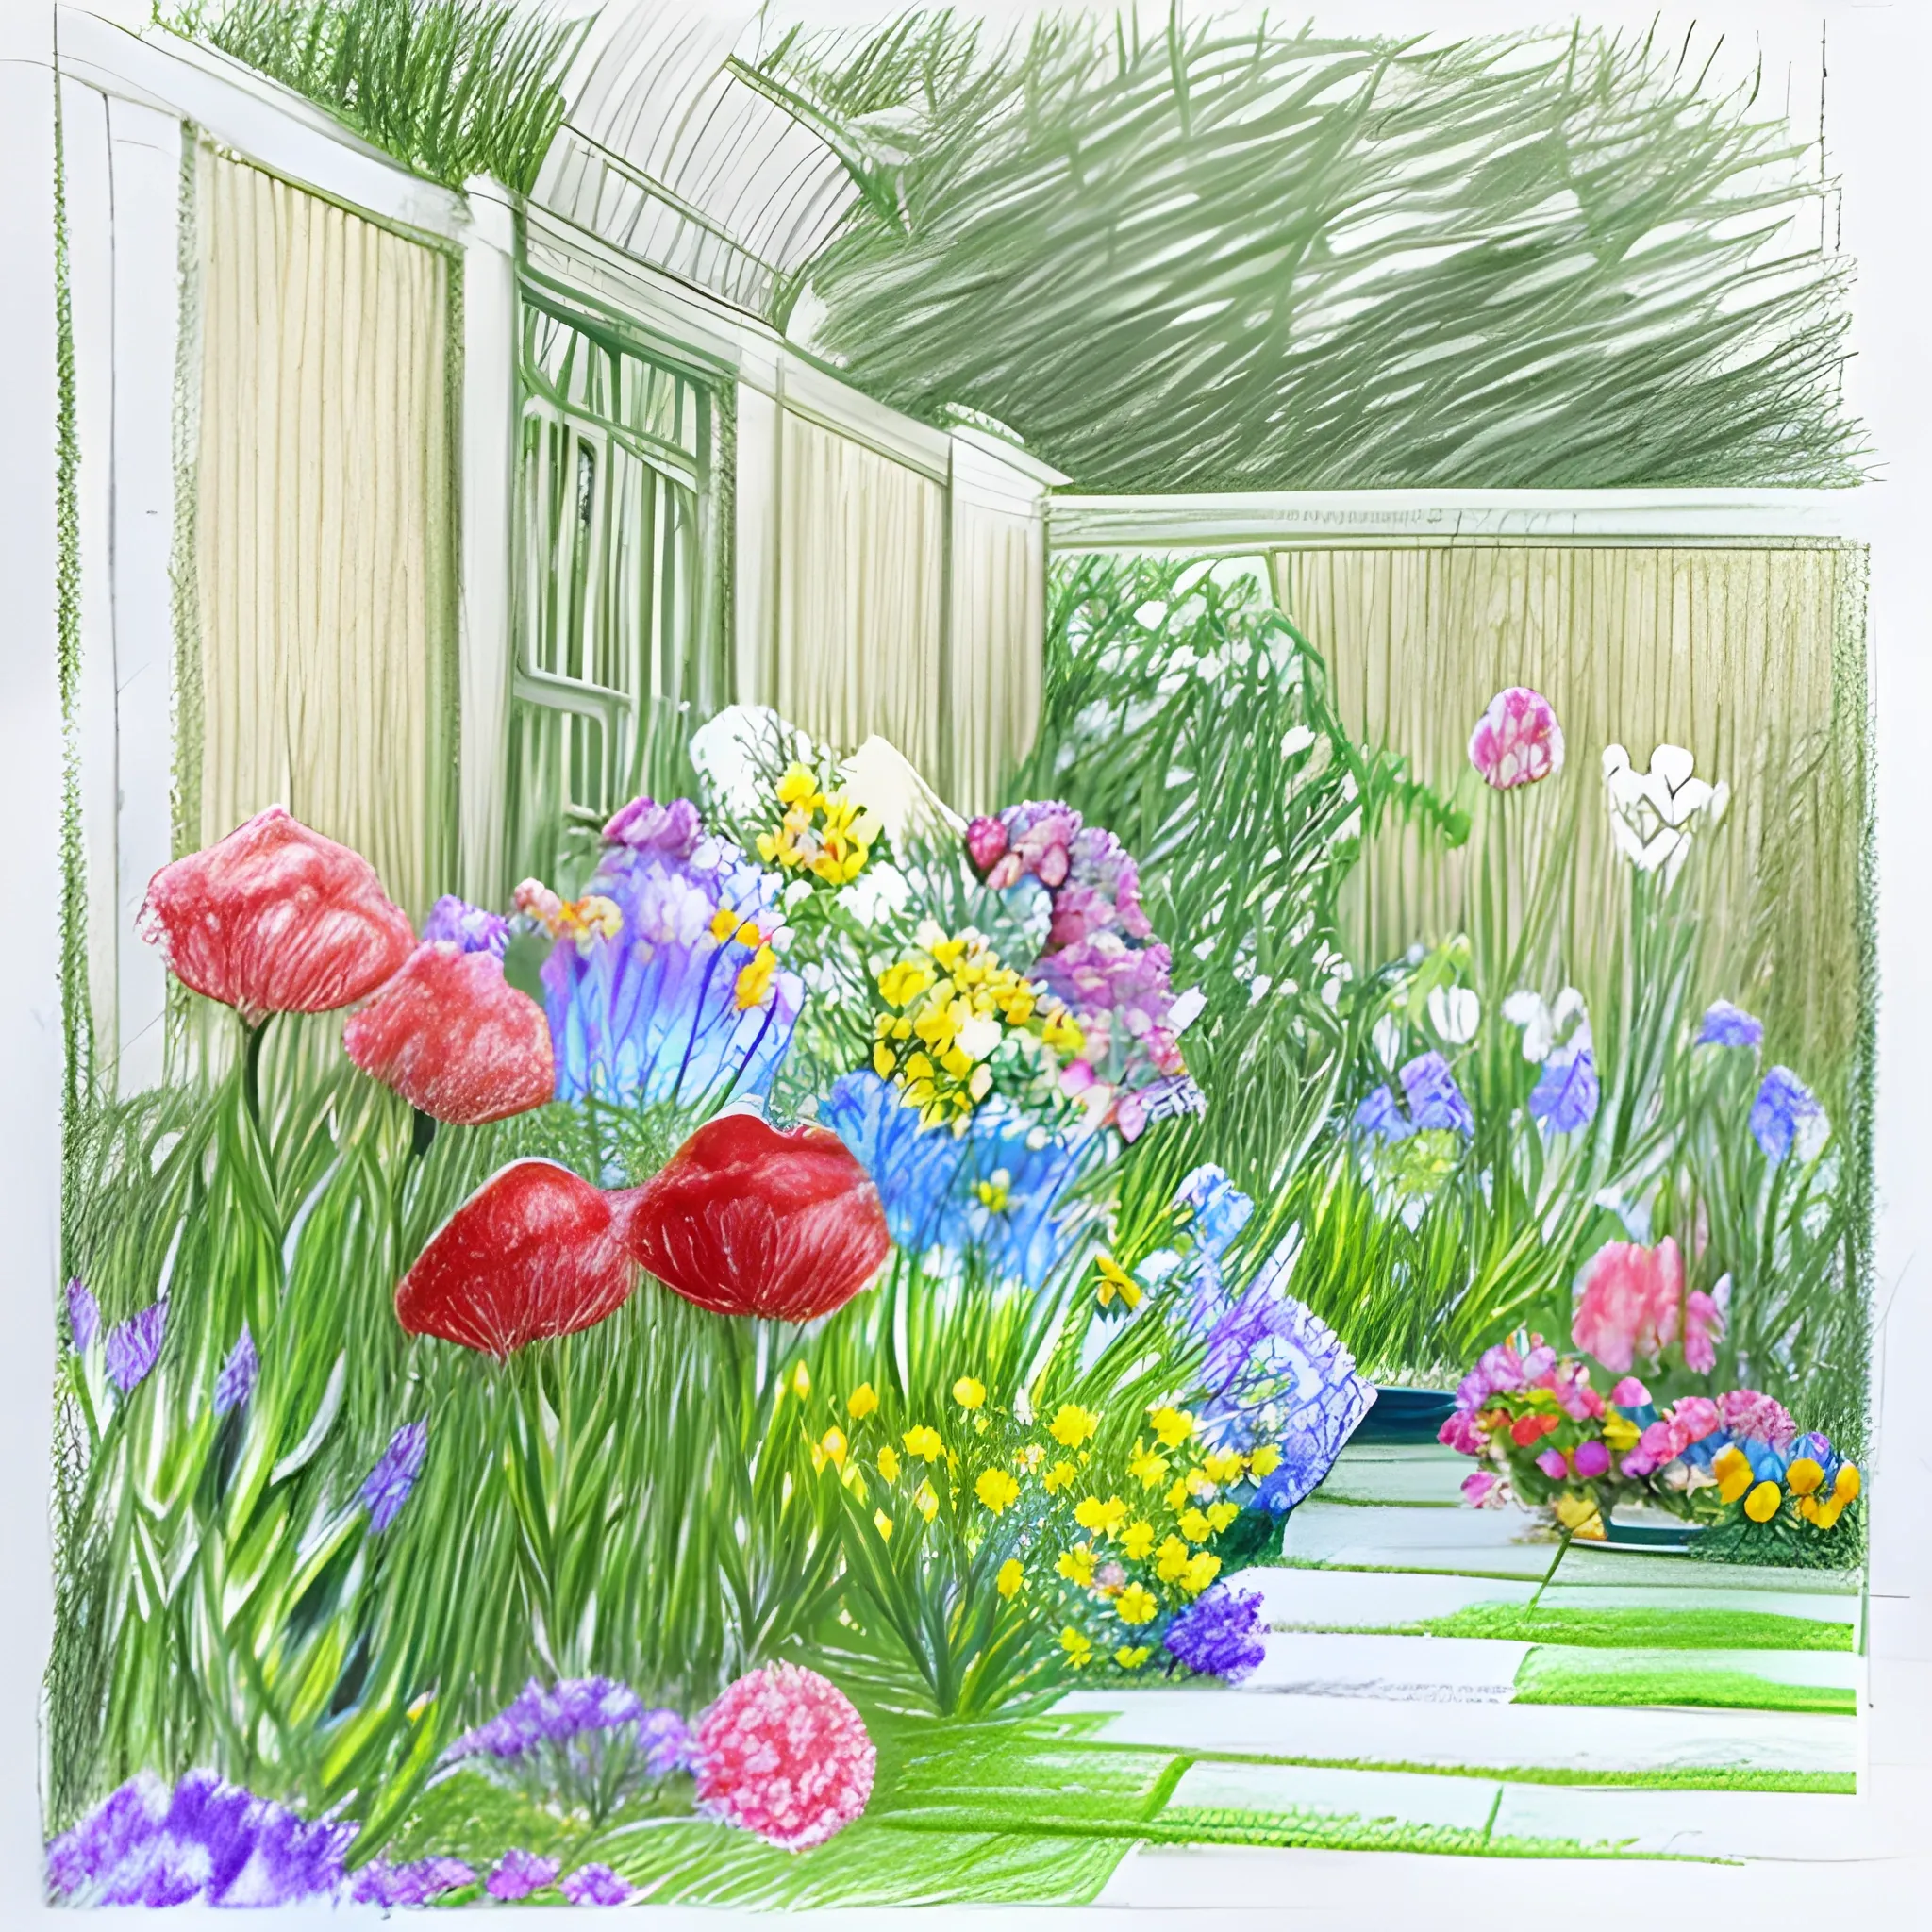 How To Draw A Garden, Step by Step, Drawing Guide, by Dawn - DragoArt